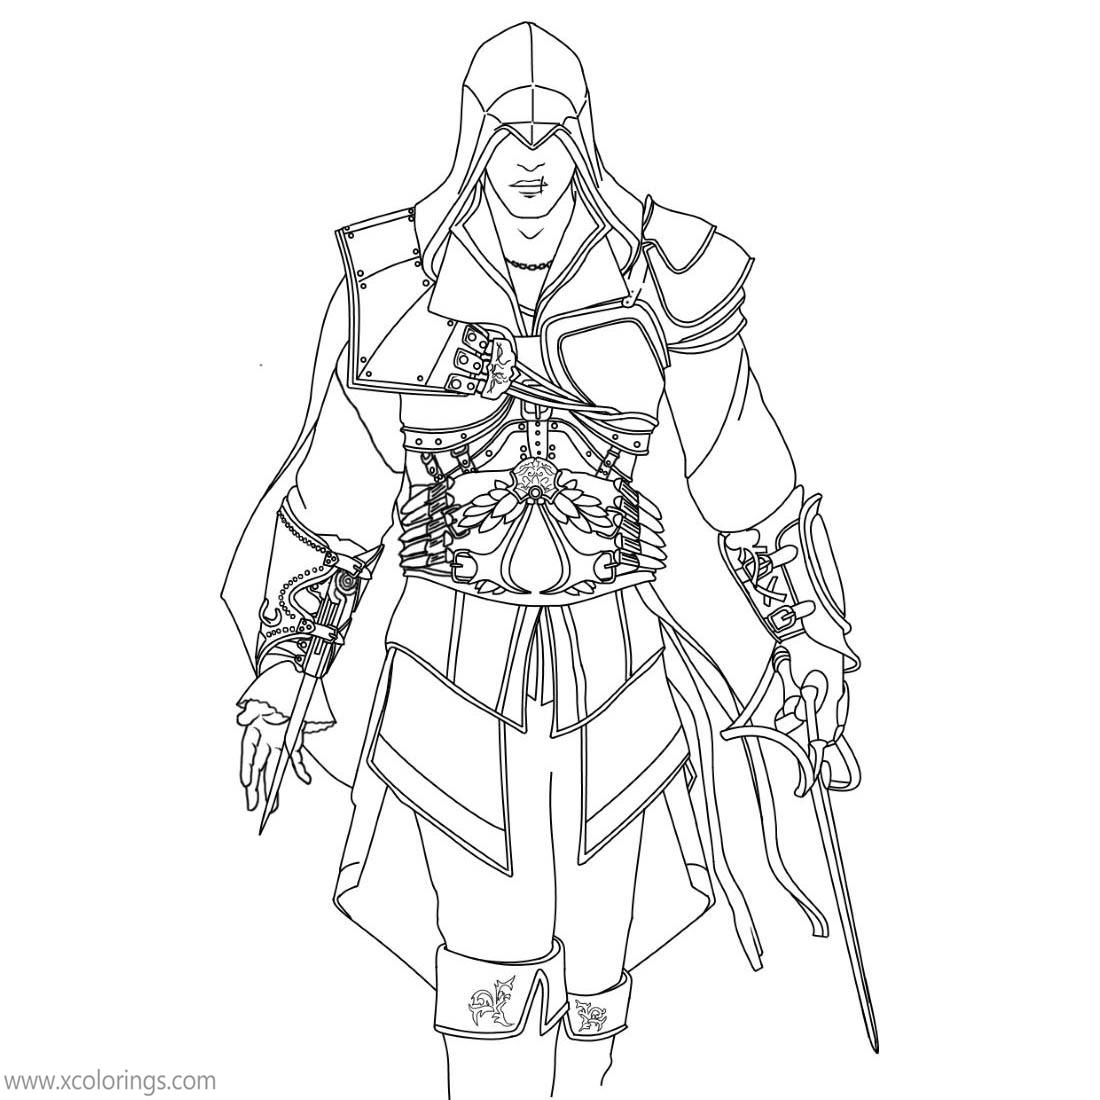 Free Assassin's Creed Coloring Pages Ezio Auditore da Firenze printable